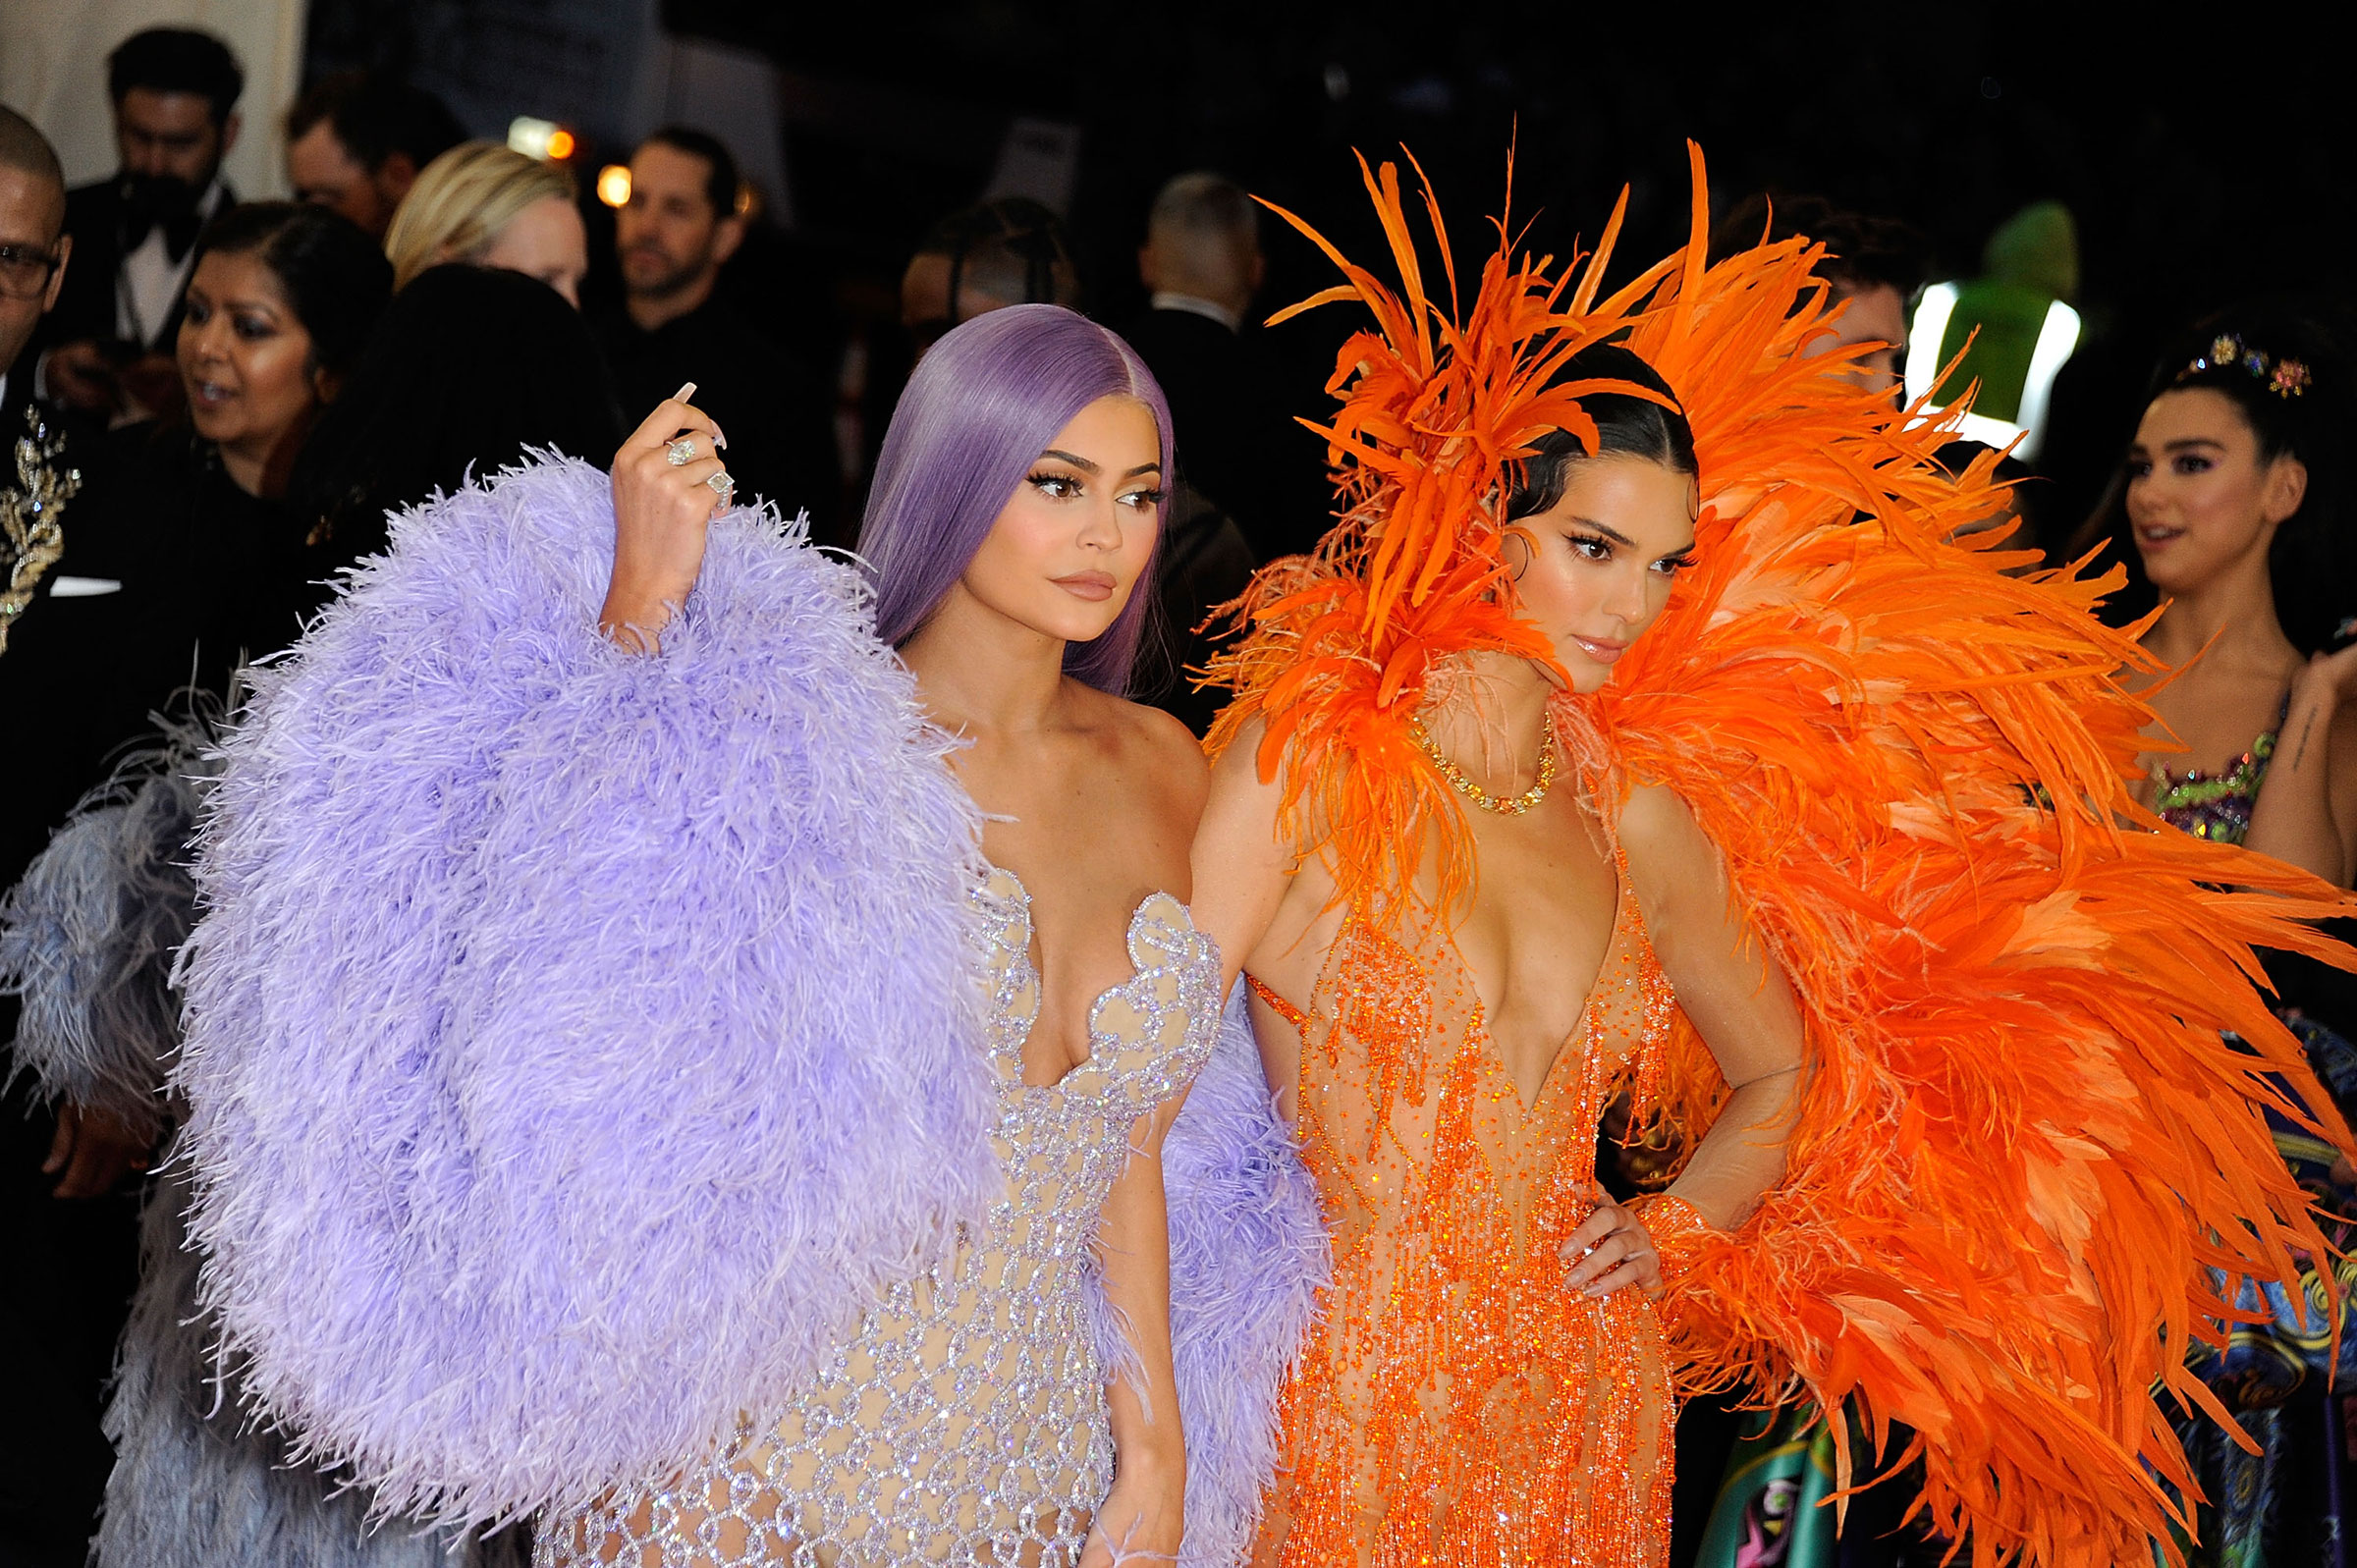 Kylie Jenner and Kendall Jenner at the 2019 Met Gala celebrating "Camp: Notes On Fashion." (Rabbani and Solimene Photography/WireImage/Getty Images)